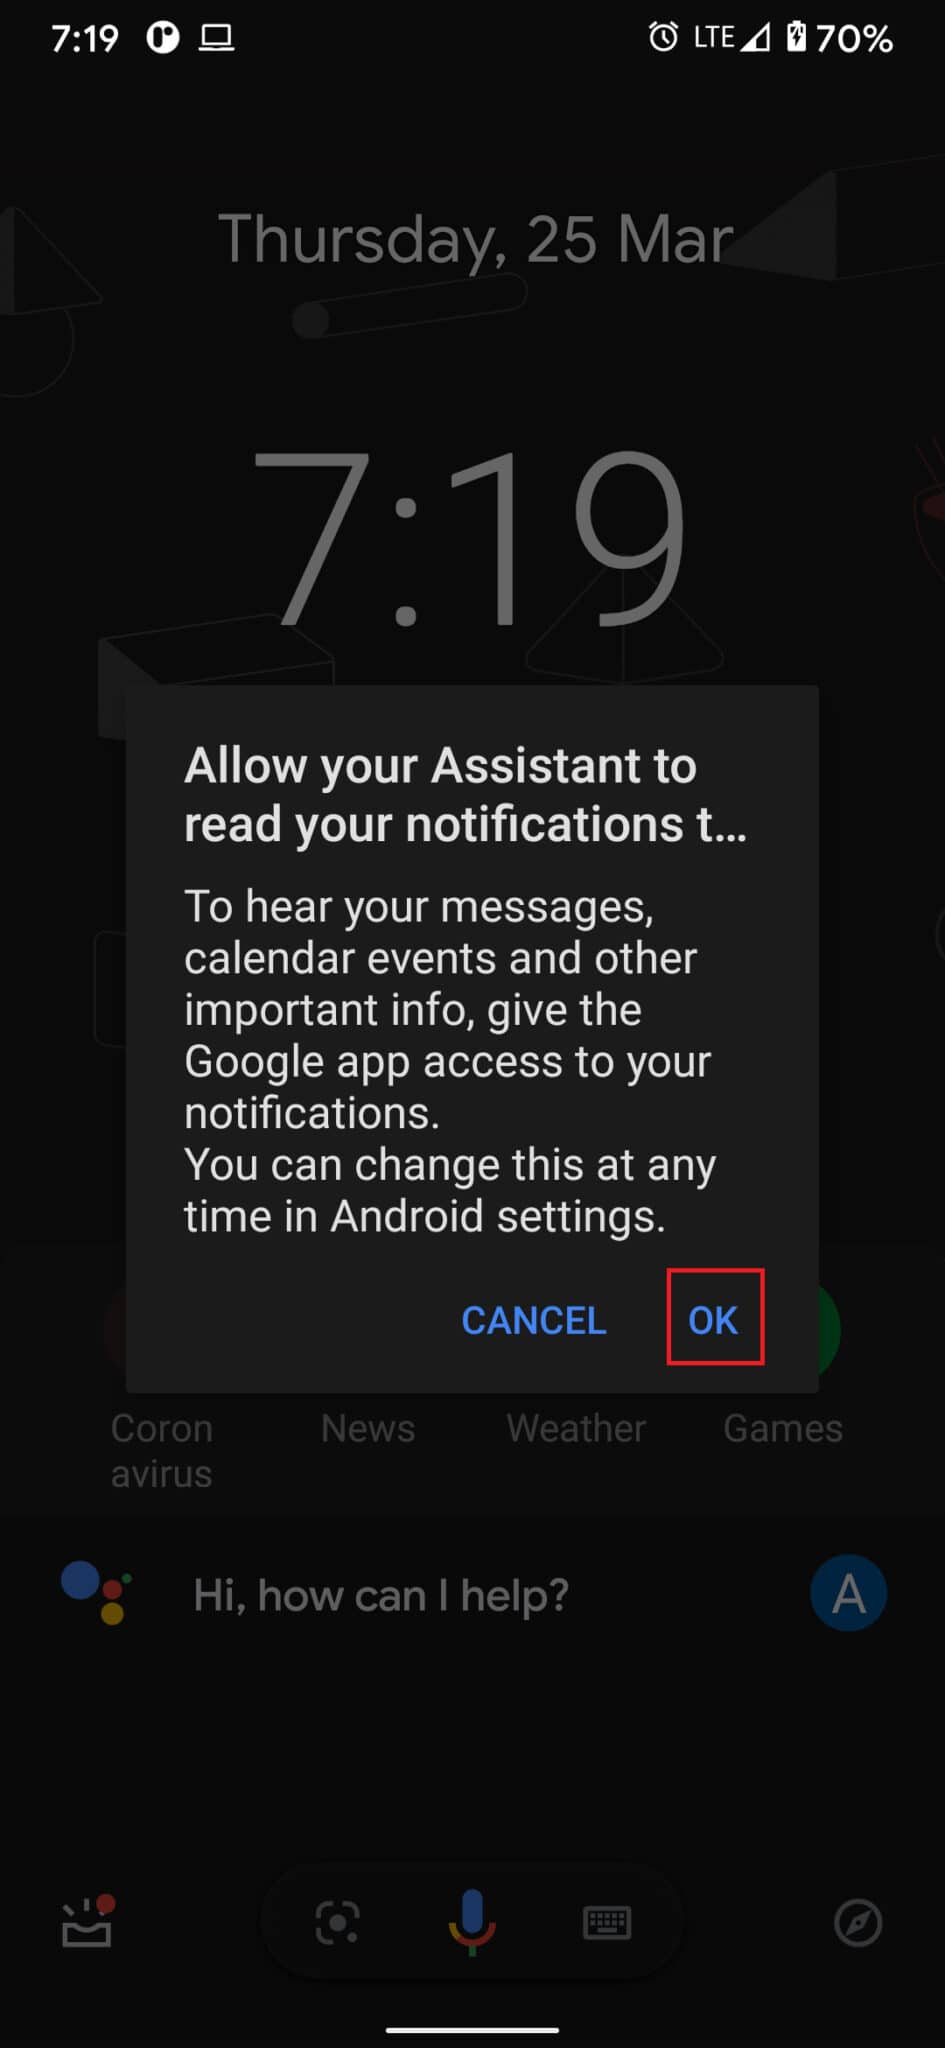 Tap on ‘Ok’ on the permission window that opens up to proceed.How to Use Text to Speech Android